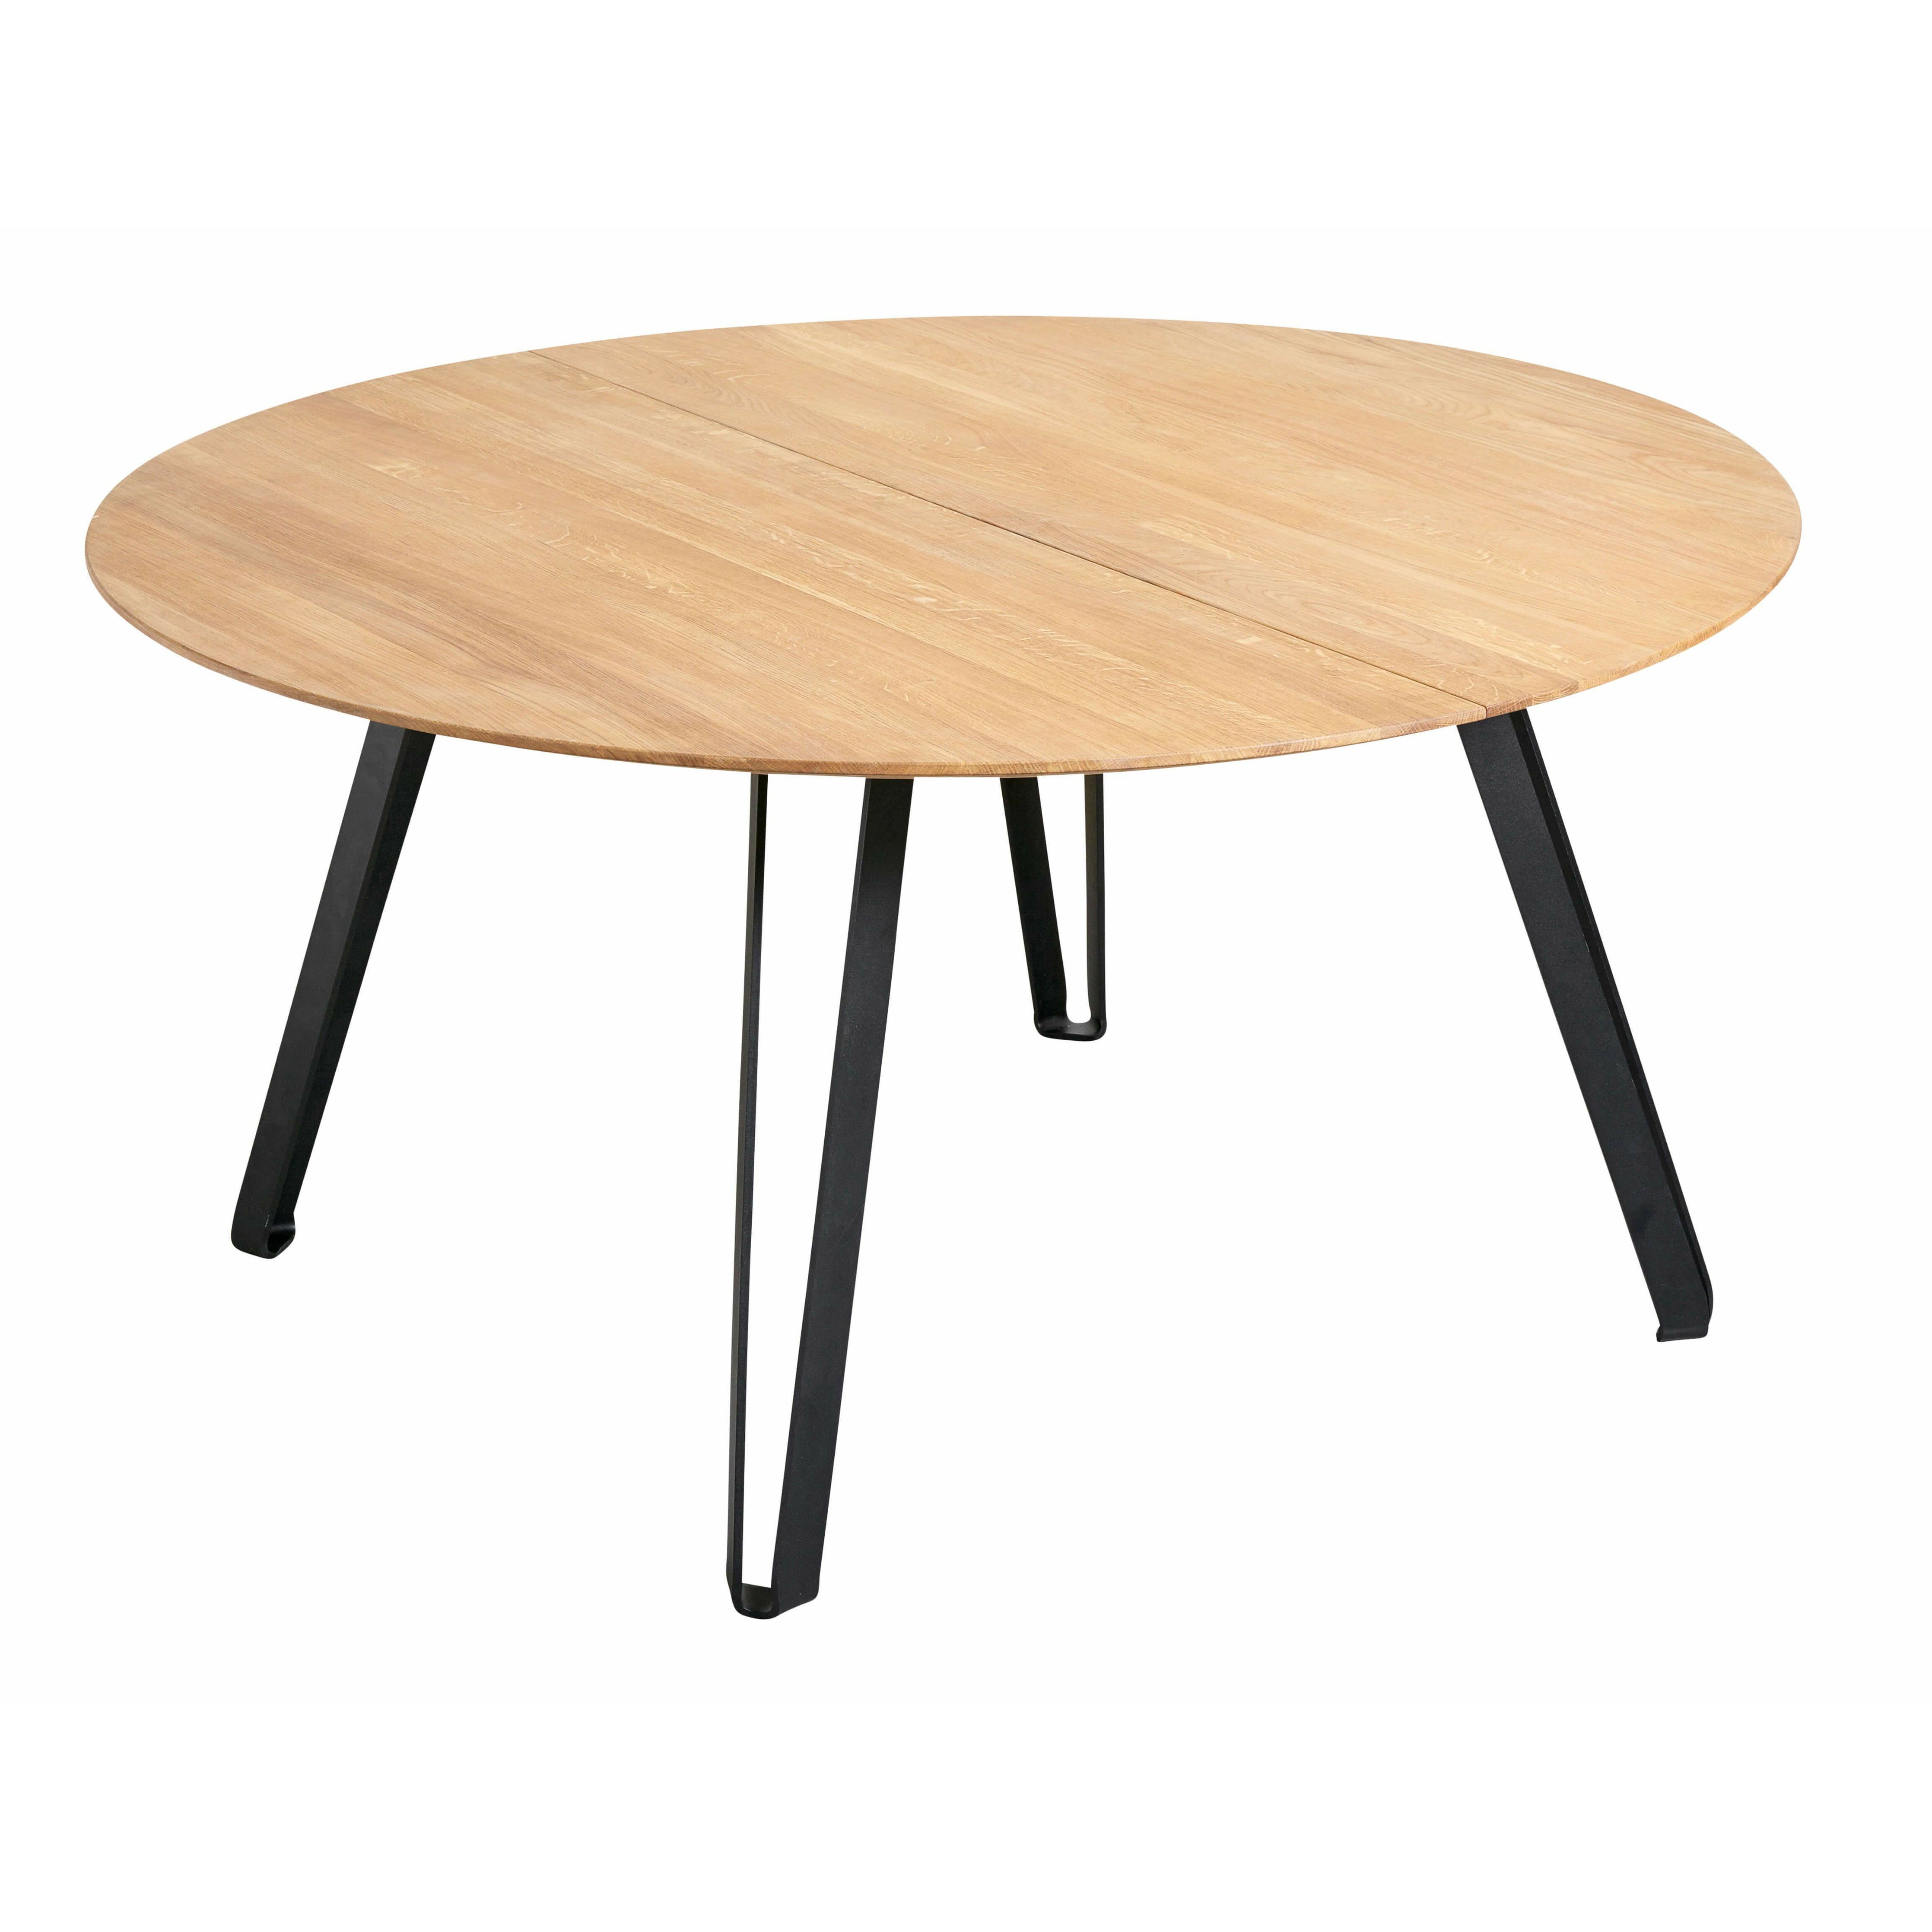 Muubs Space Jading Table Round Oak, 150 cm